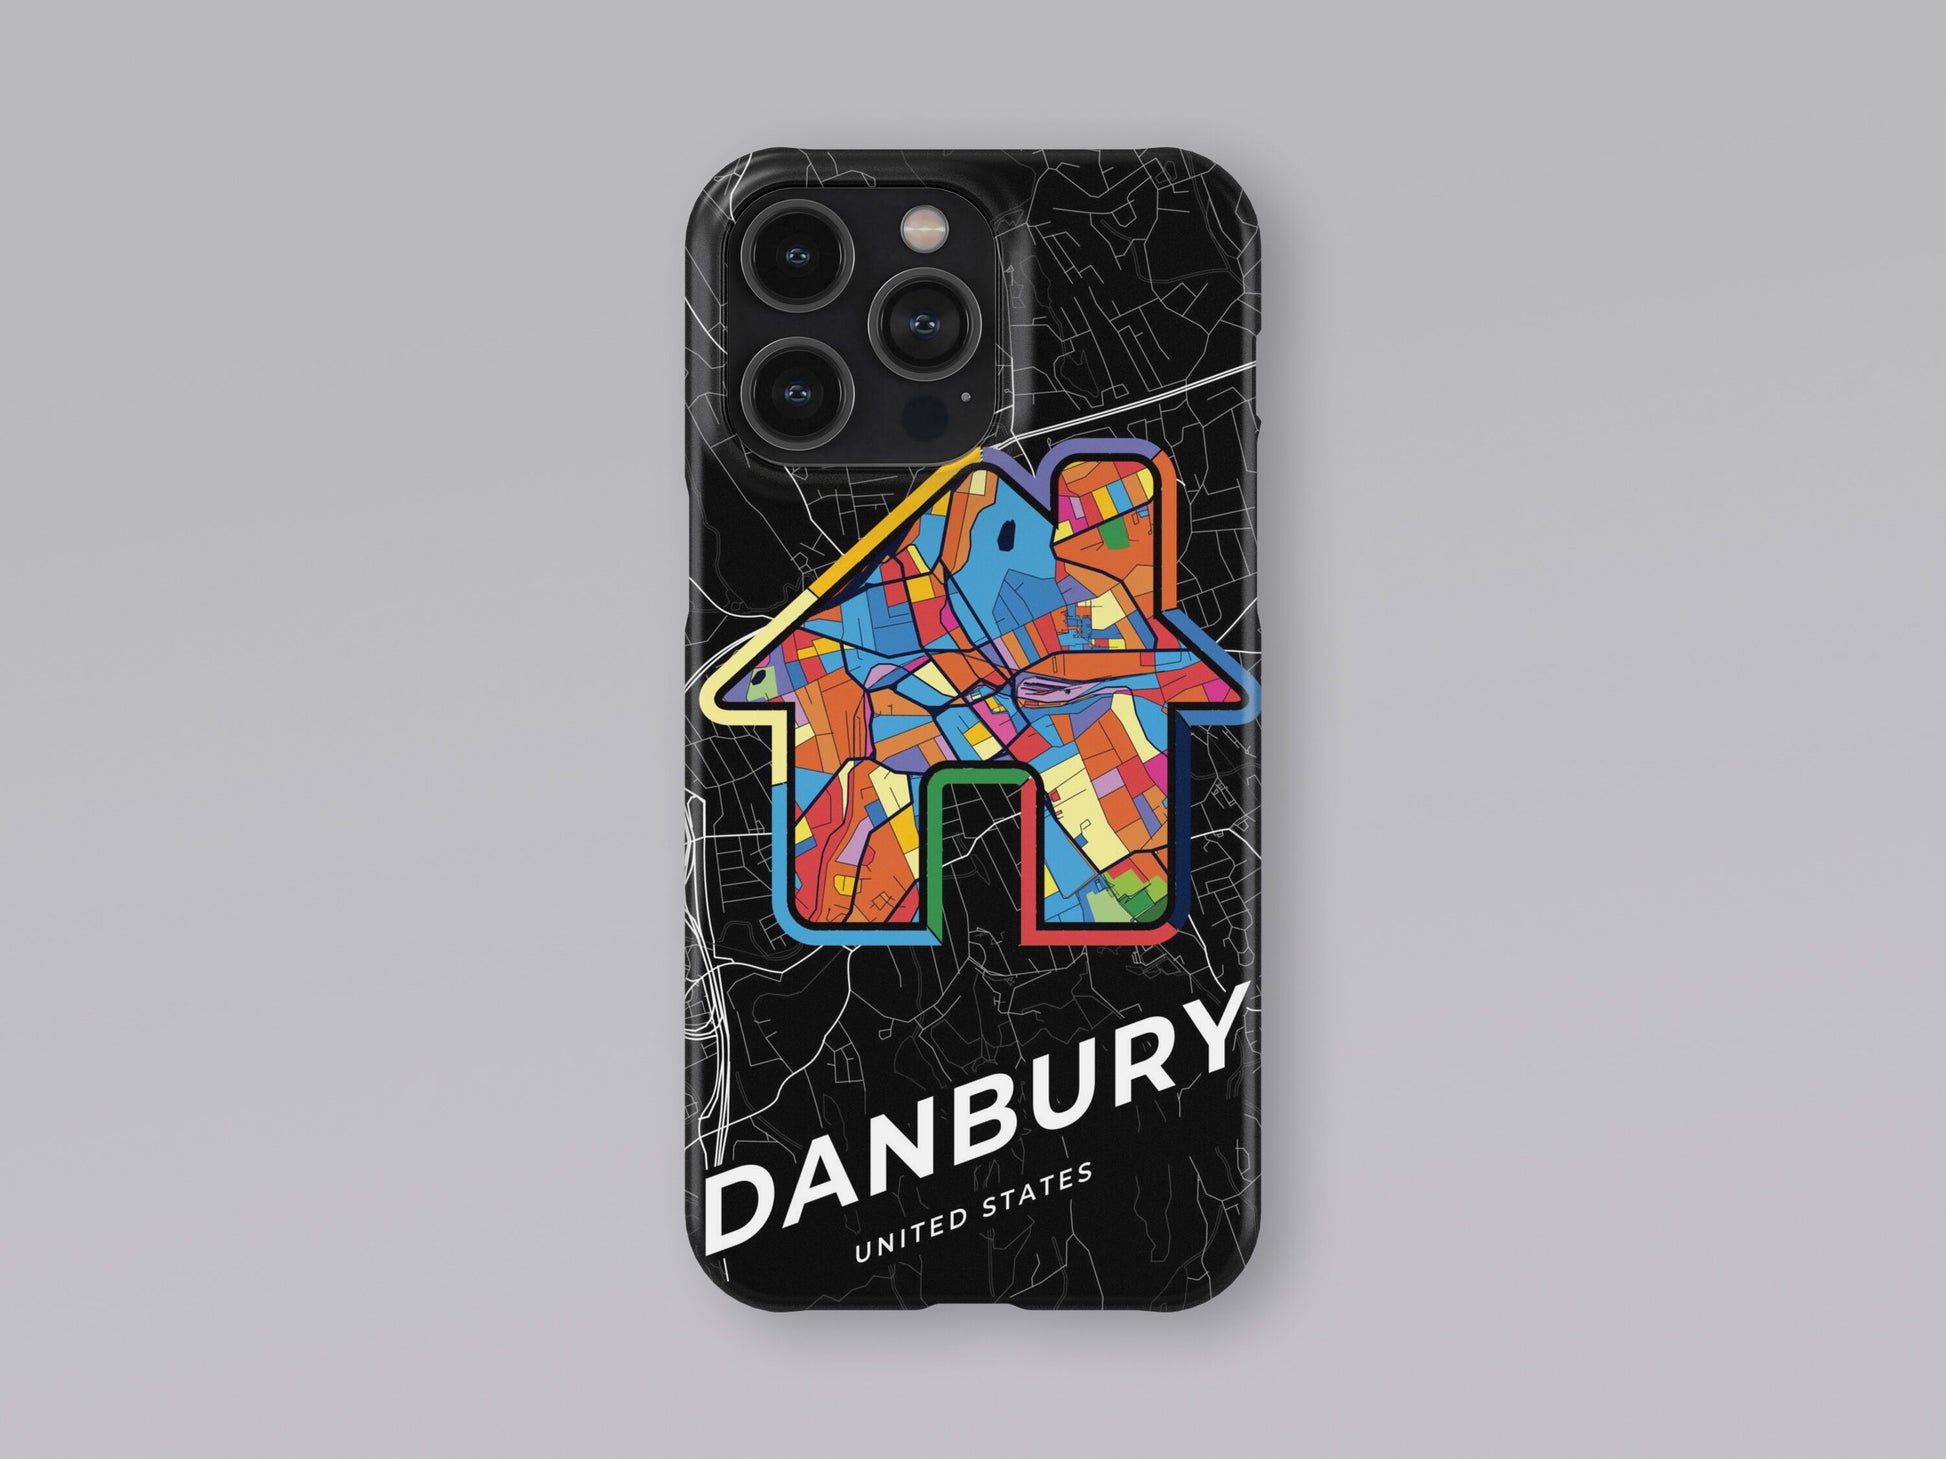 Danbury Connecticut slim phone case with colorful icon. Birthday, wedding or housewarming gift. Couple match cases. 3